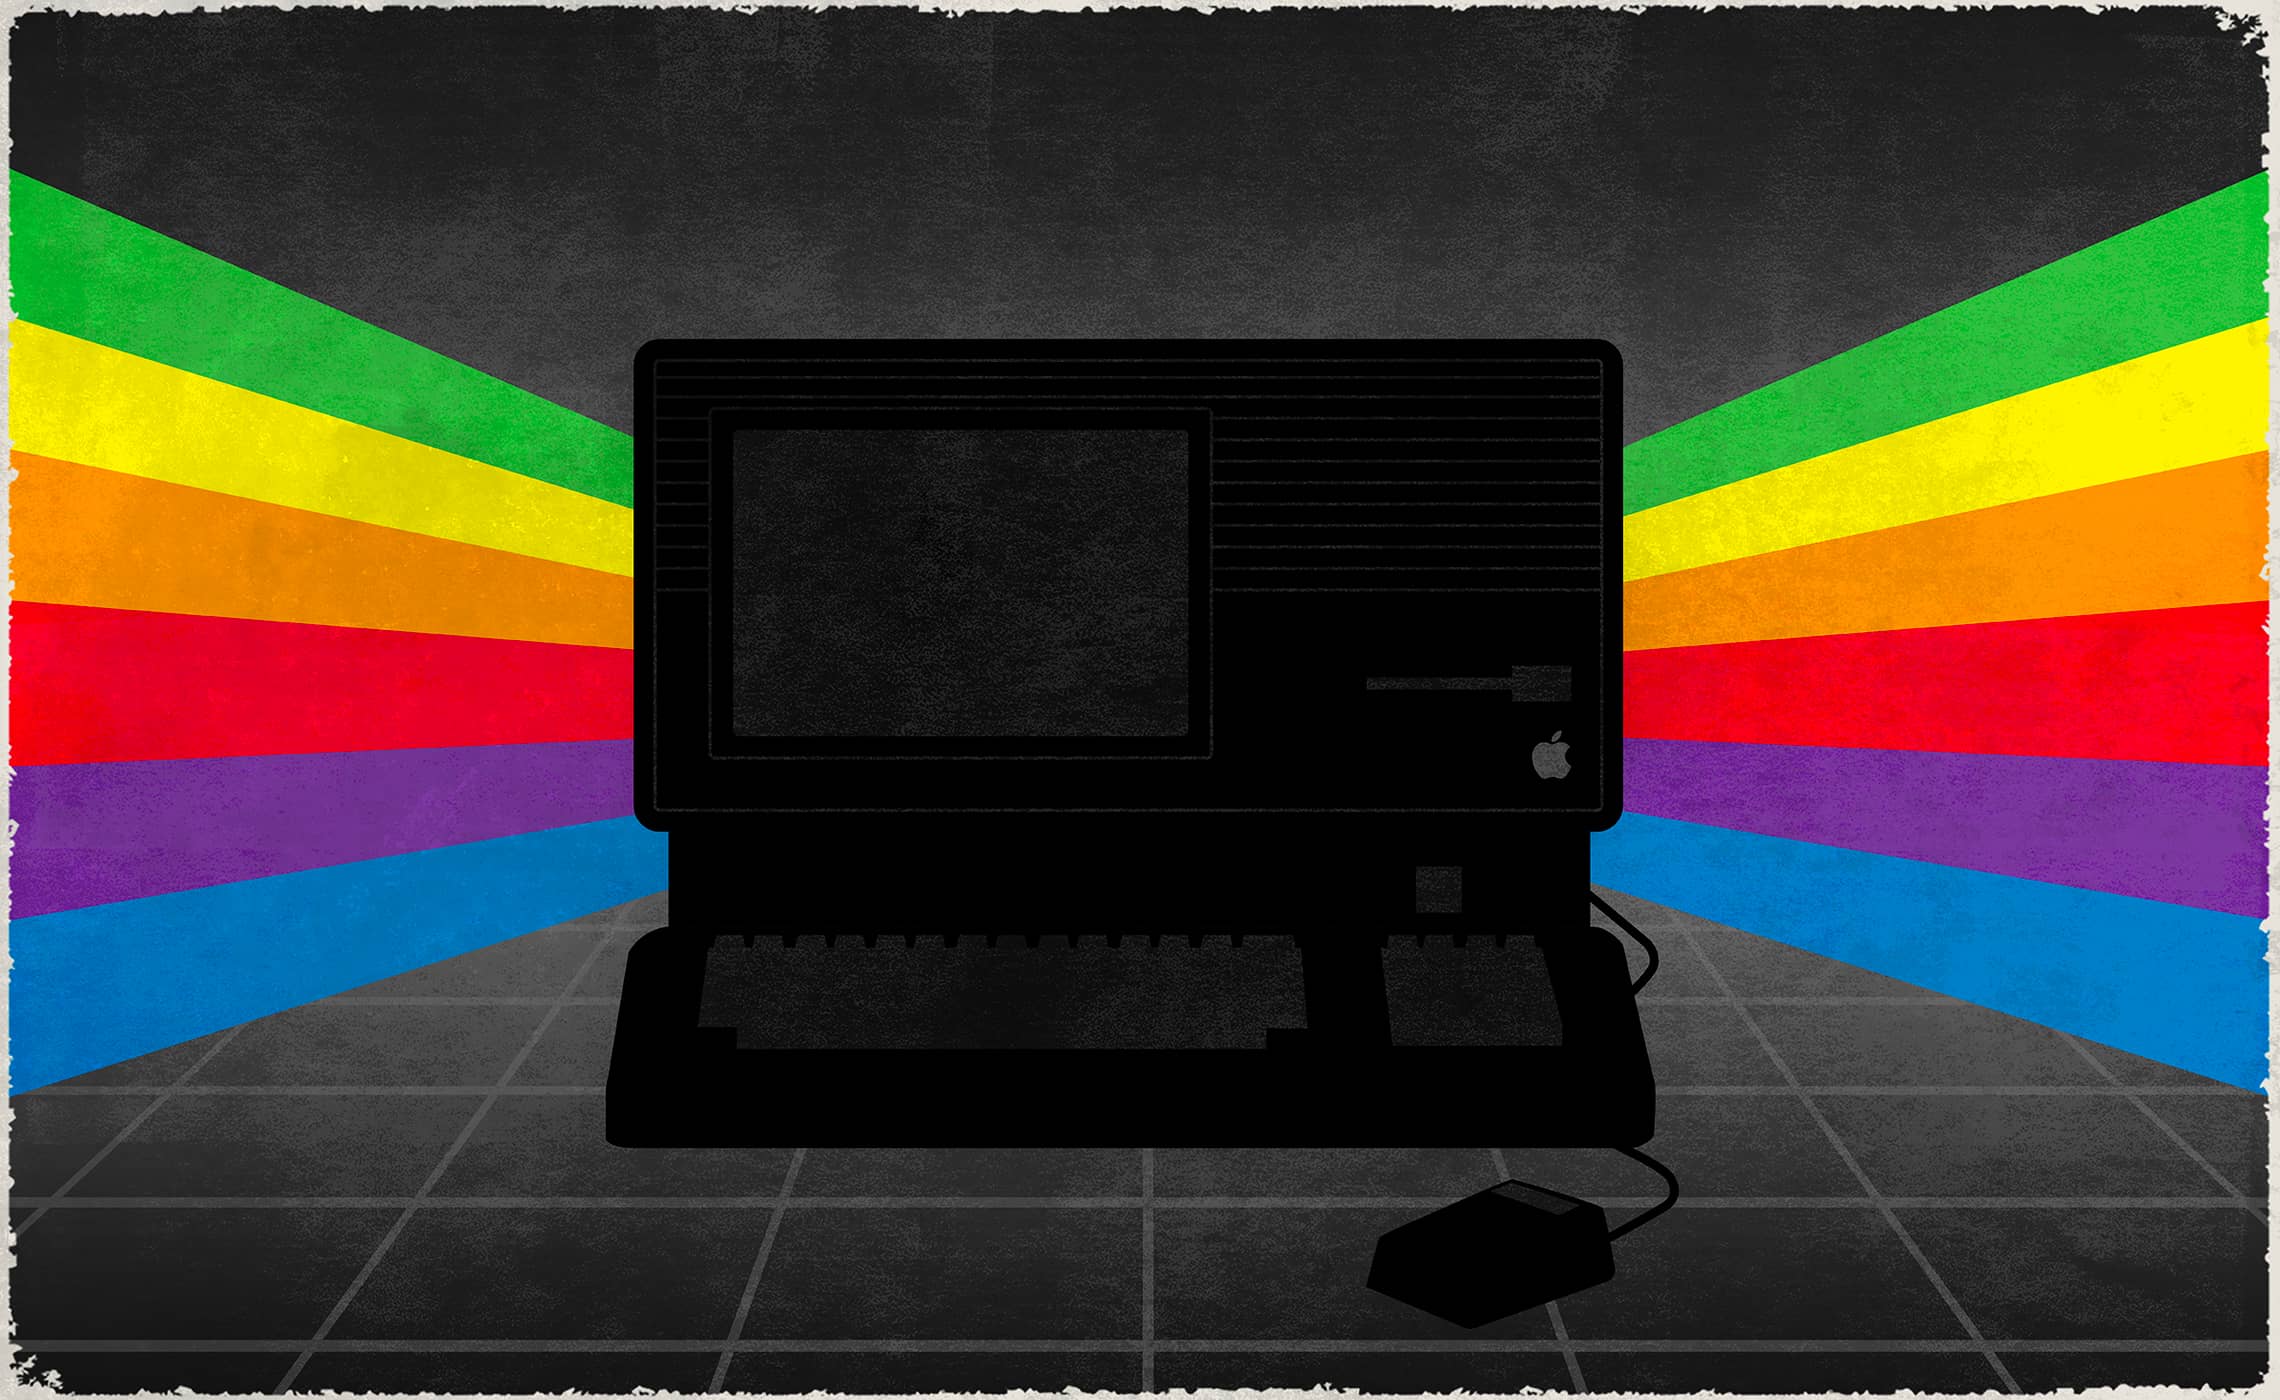 blacked out computer with rainbow in the background